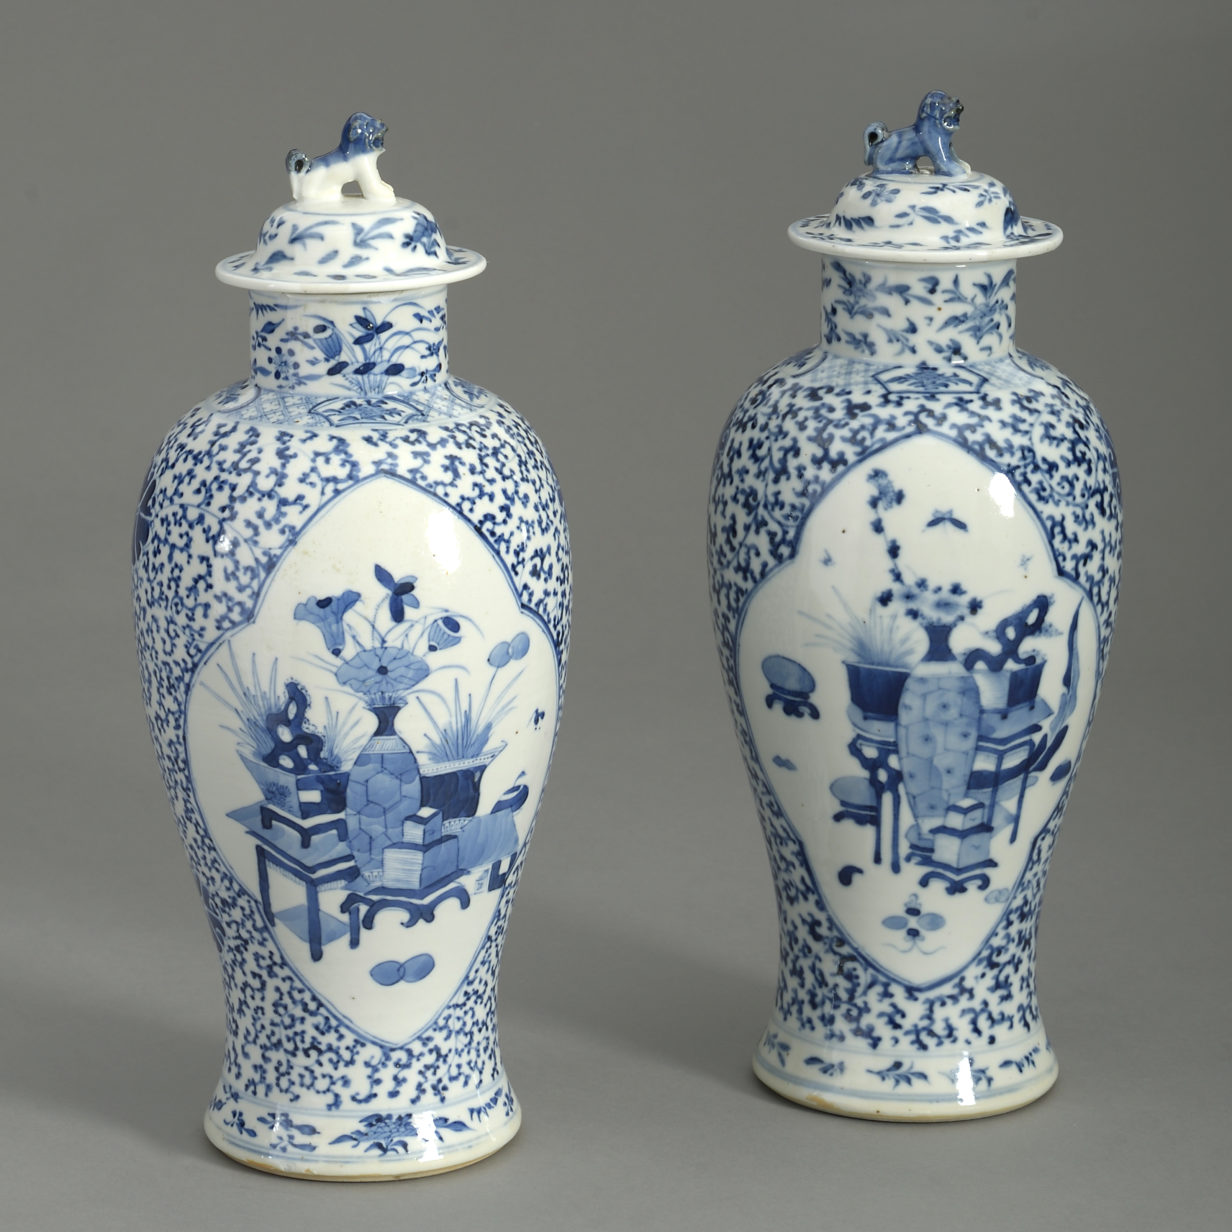 Pair of 19th century blue and white vases and covers